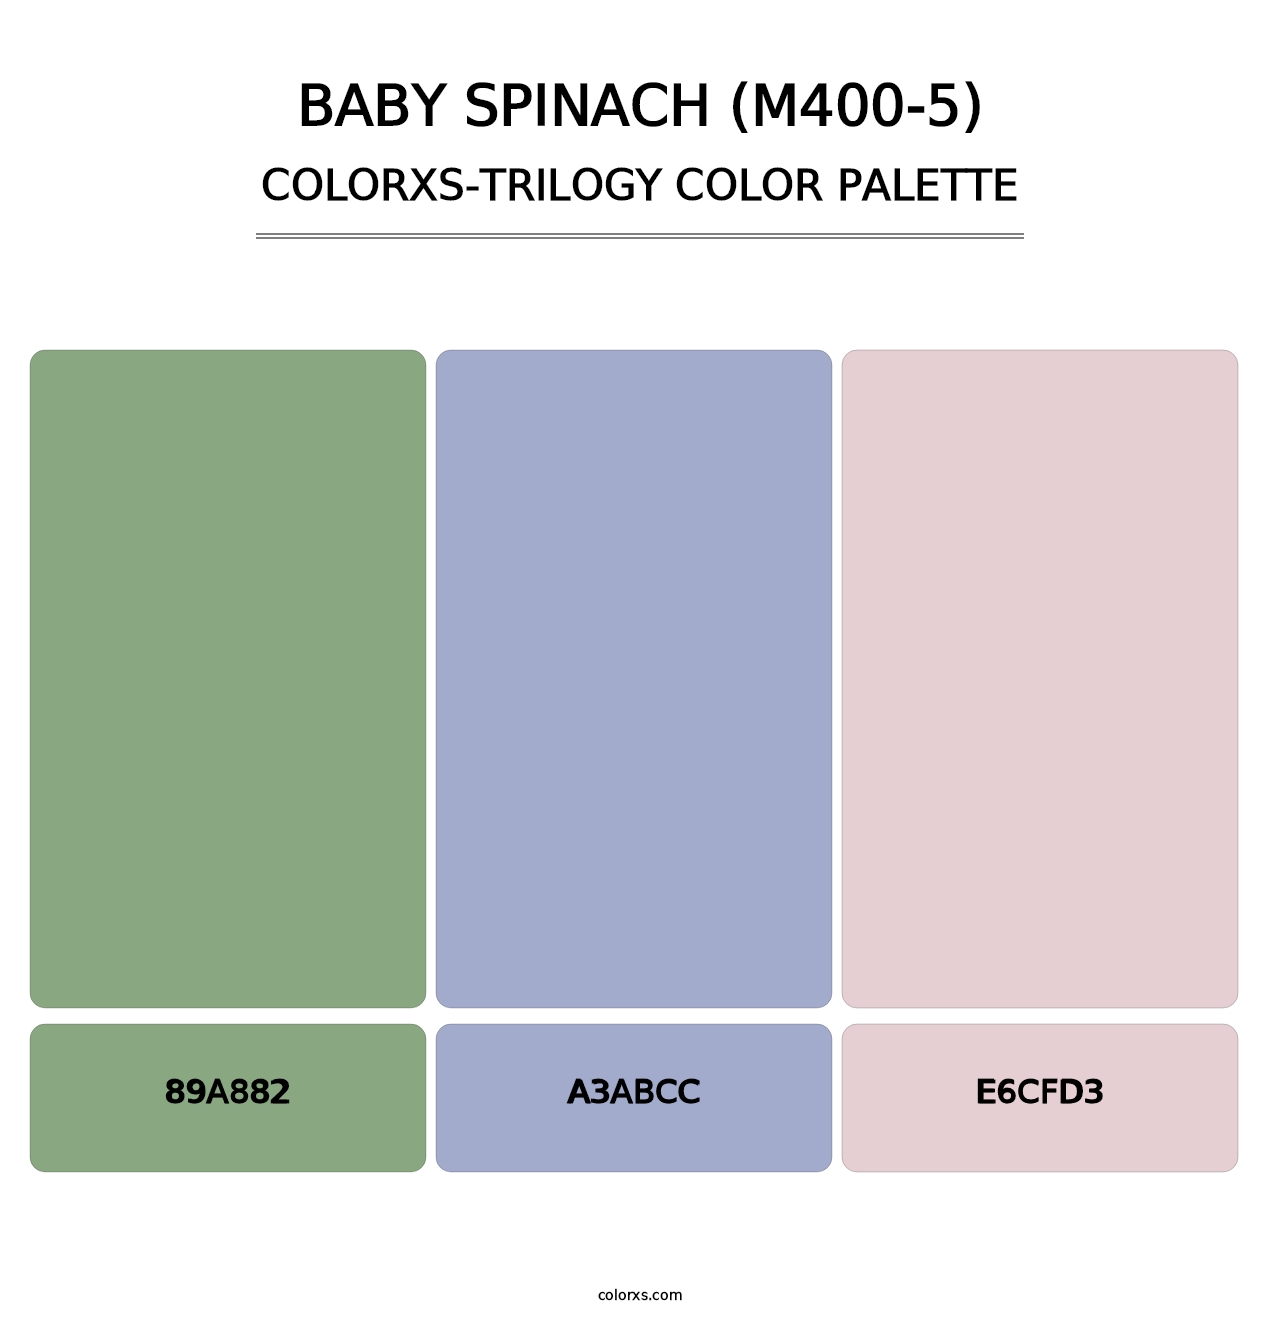 Baby Spinach (M400-5) - Colorxs Trilogy Palette